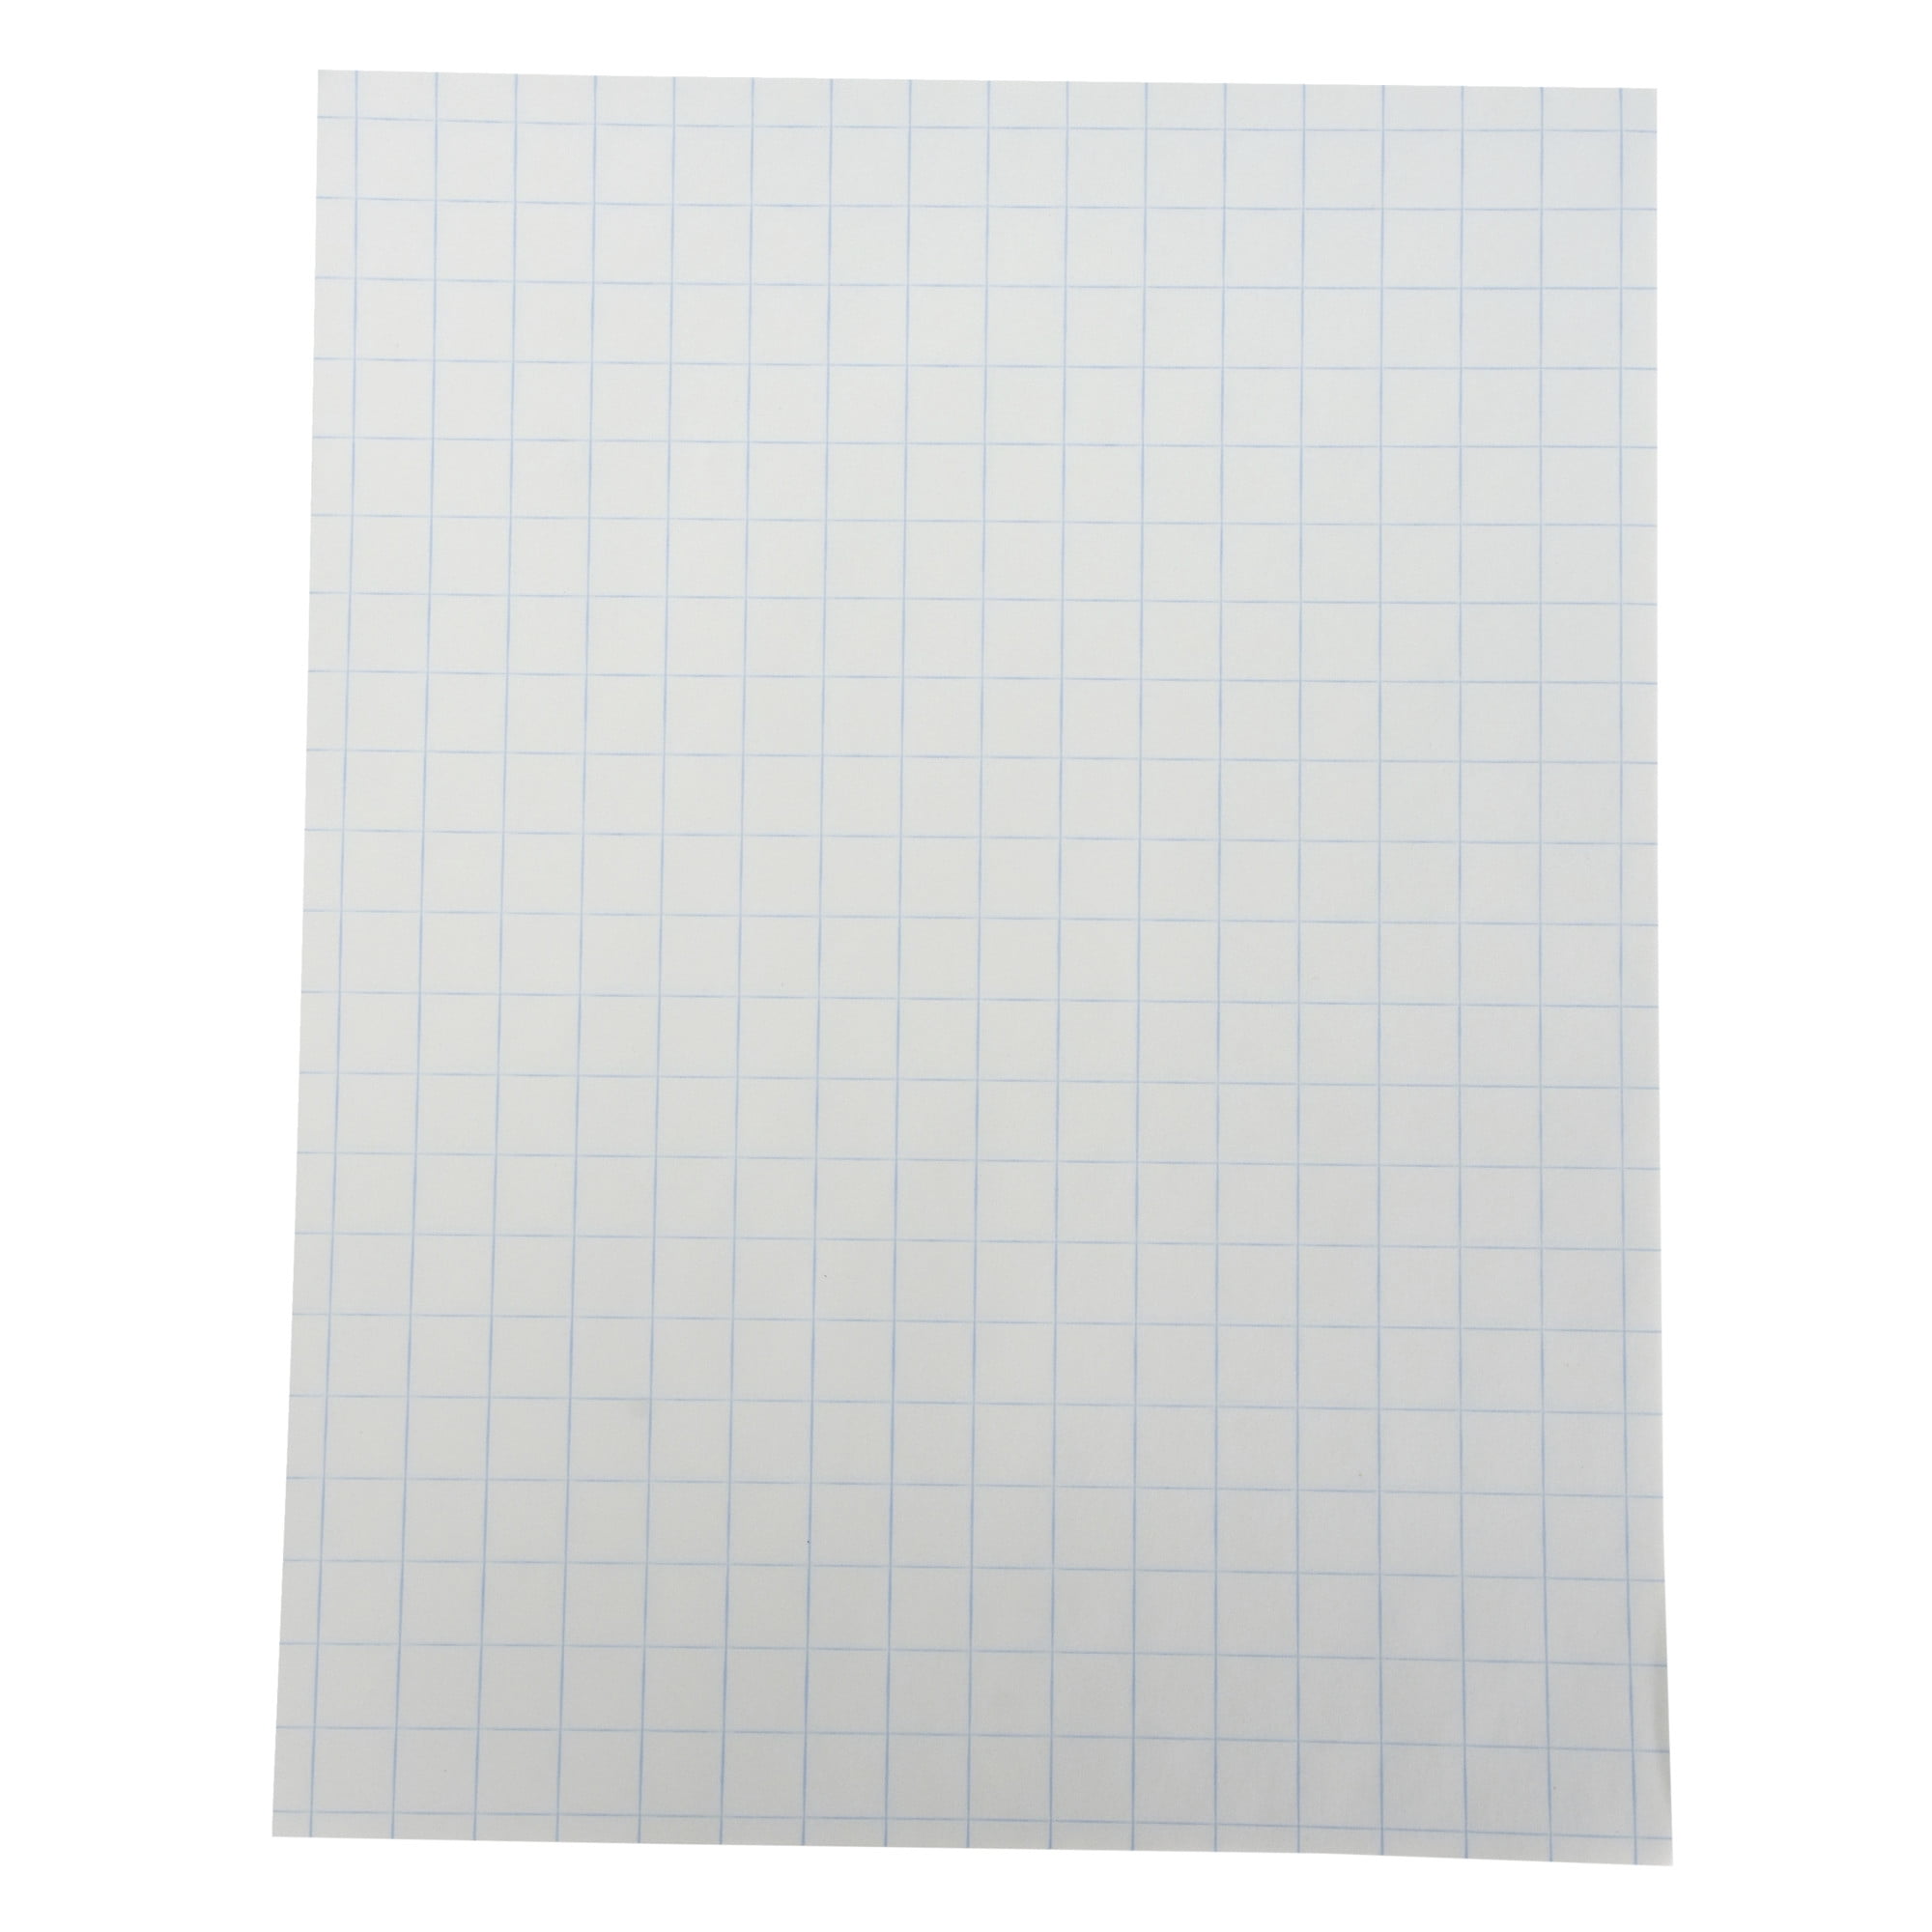 Paper 24 X 36 Large Graph Paper 1 And 1/5 Ruled (PGP524X36) 